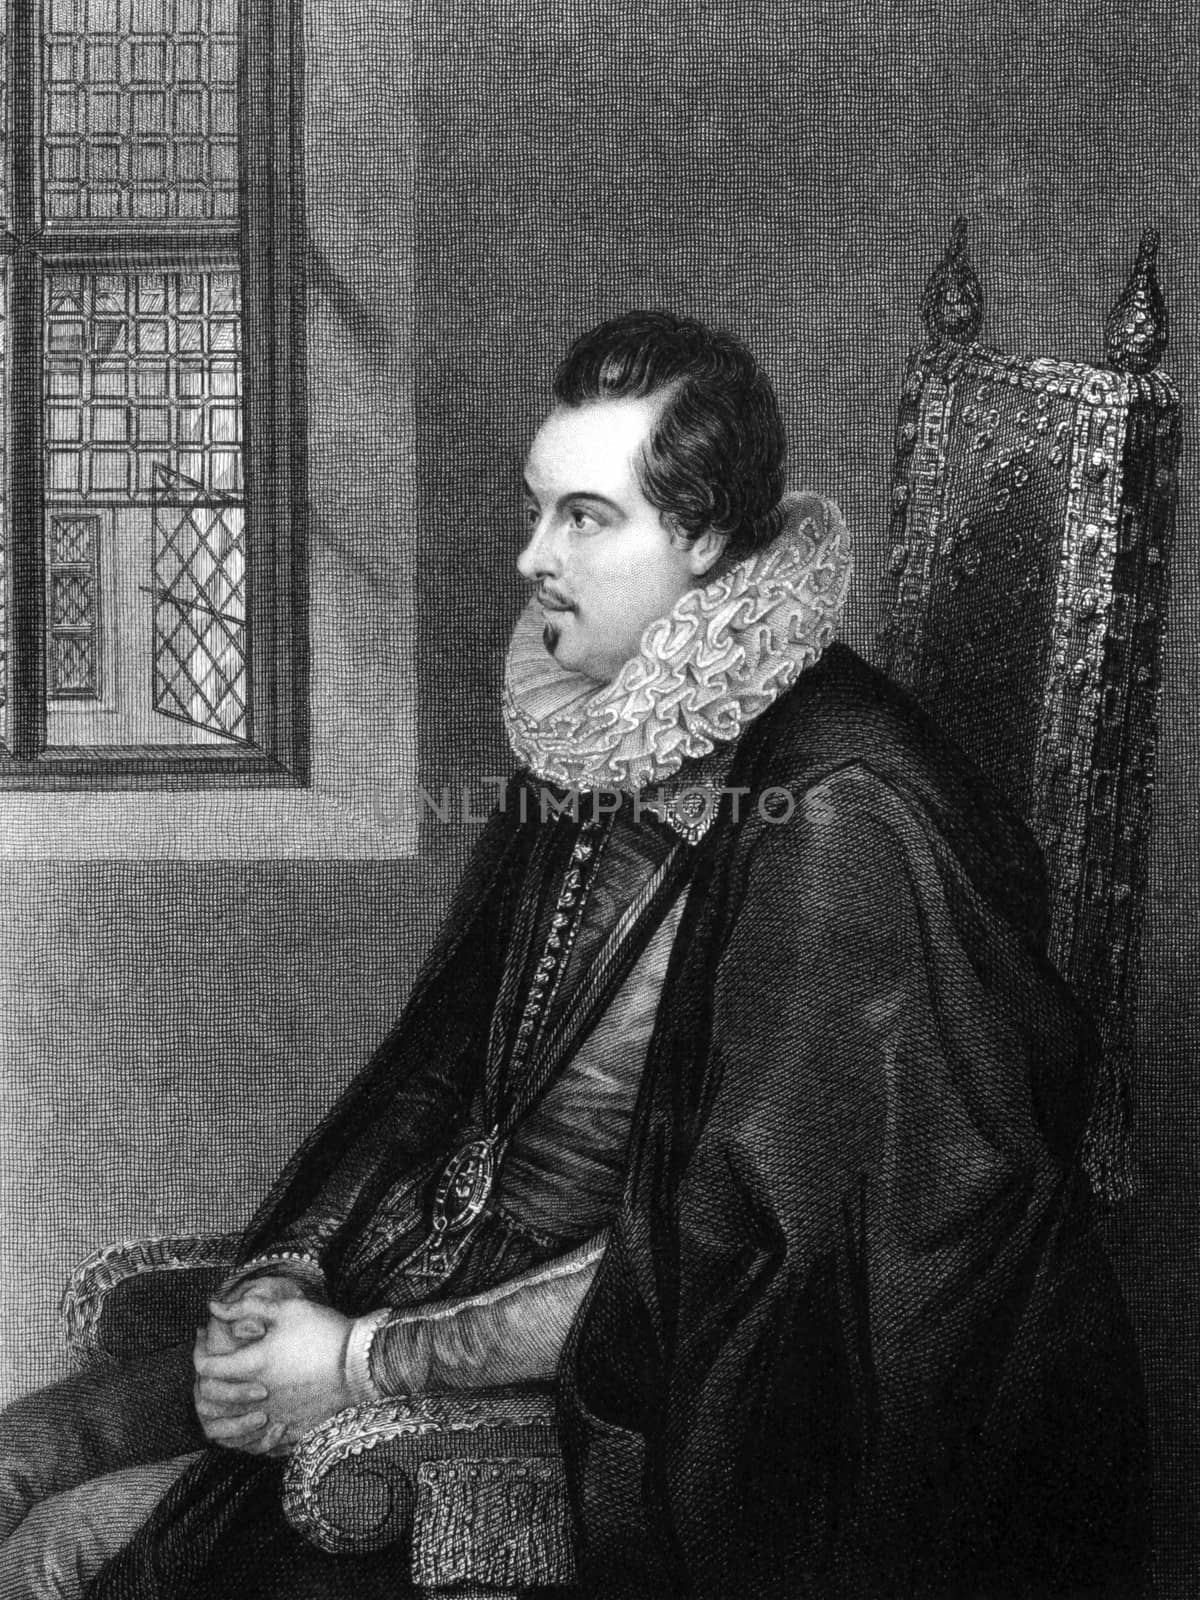 Charles Blount, 8th Baron Mountjoy (1563-1606) on engraving from 1830. English nobleman and soldier. Engraved by H.T.Ryall and published in ''Portraits of Illustrious Personages of Great Britain'',UK,1830.